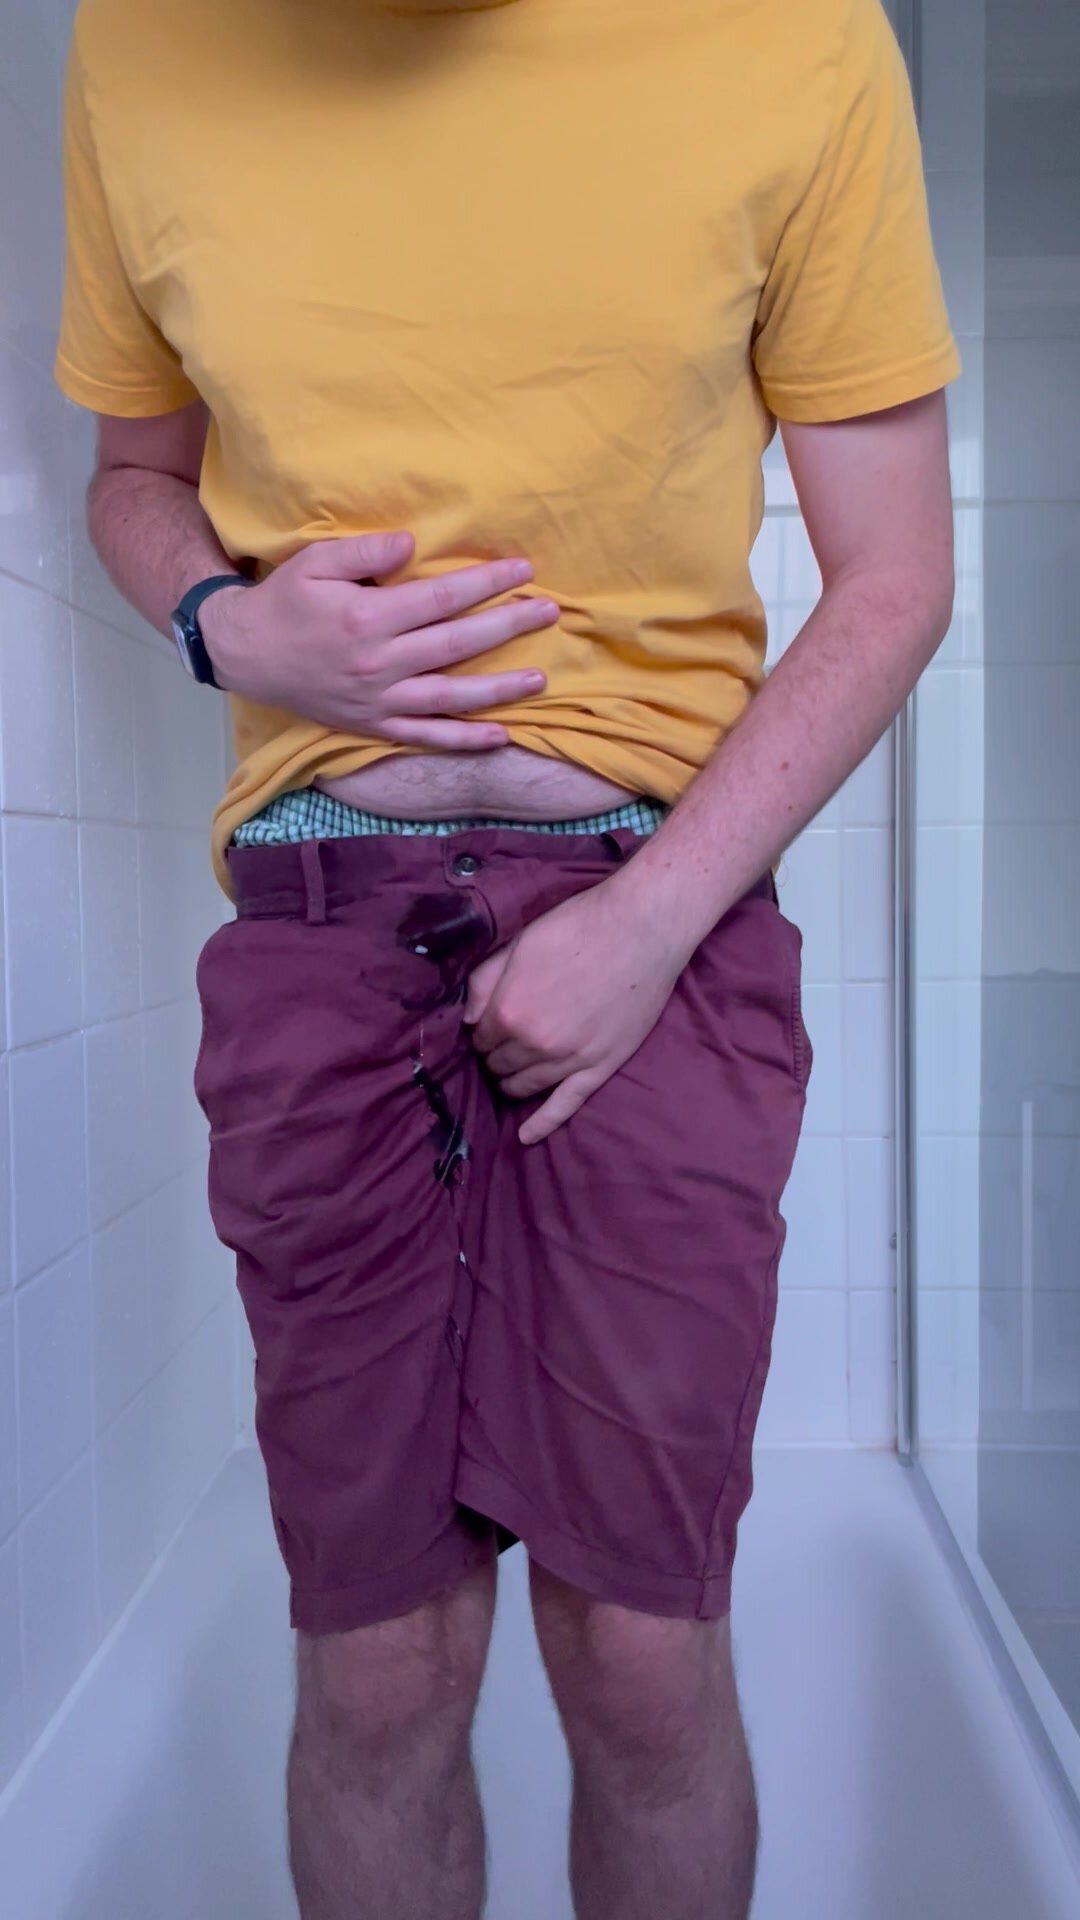 Piss in a friends clothes